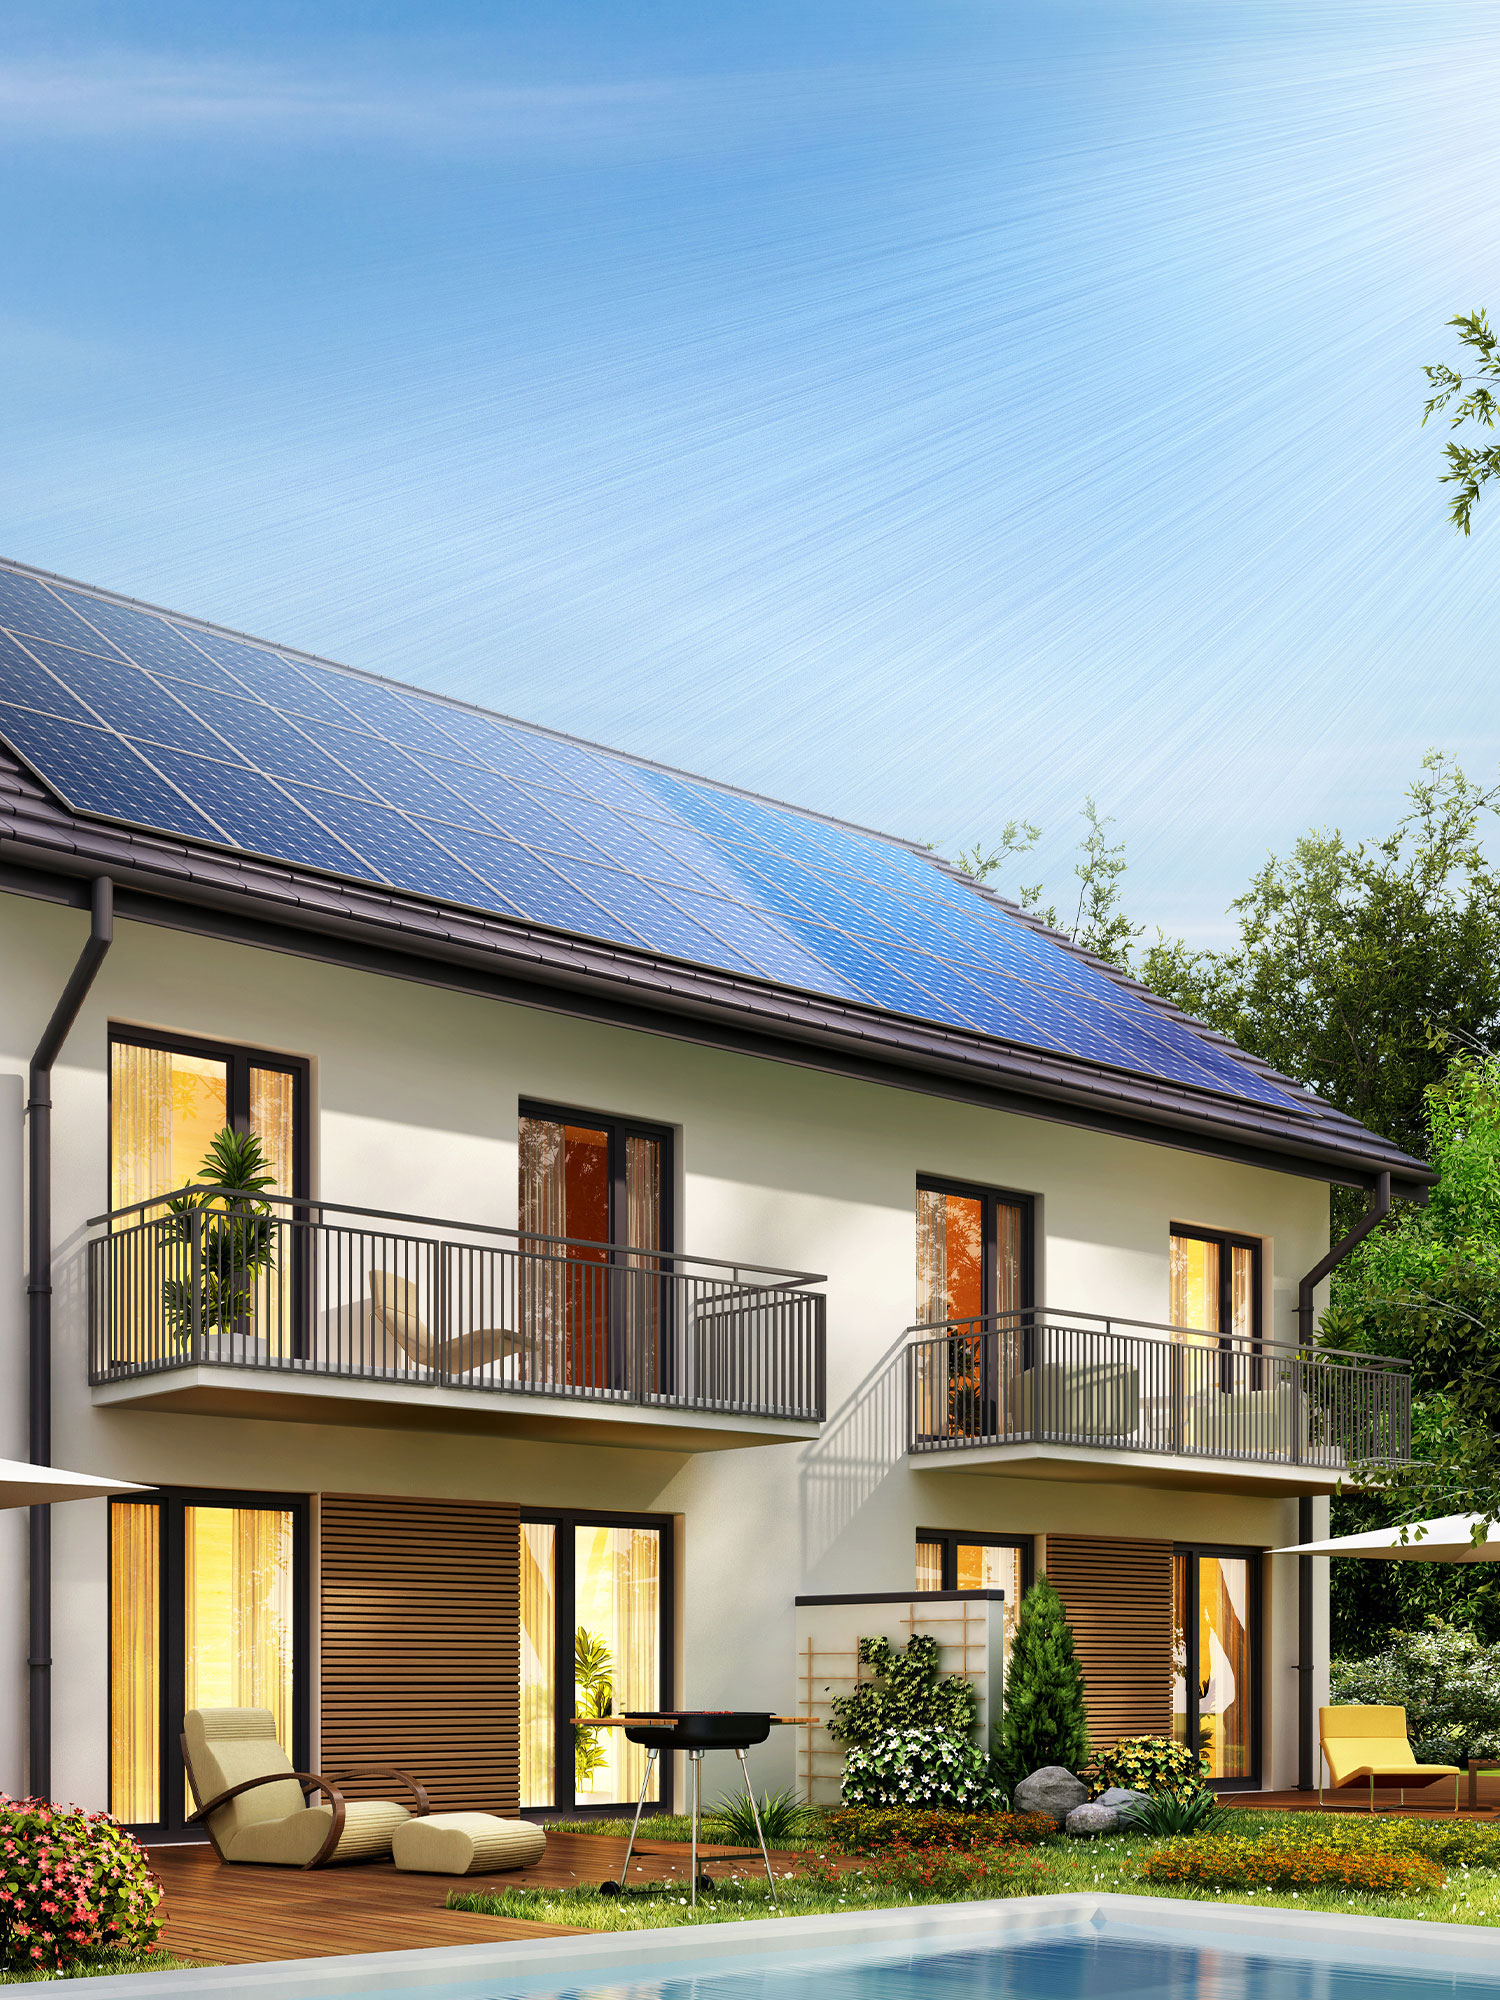 Energy independence for home in Lehi is easy with SunPower by Custom Energy.